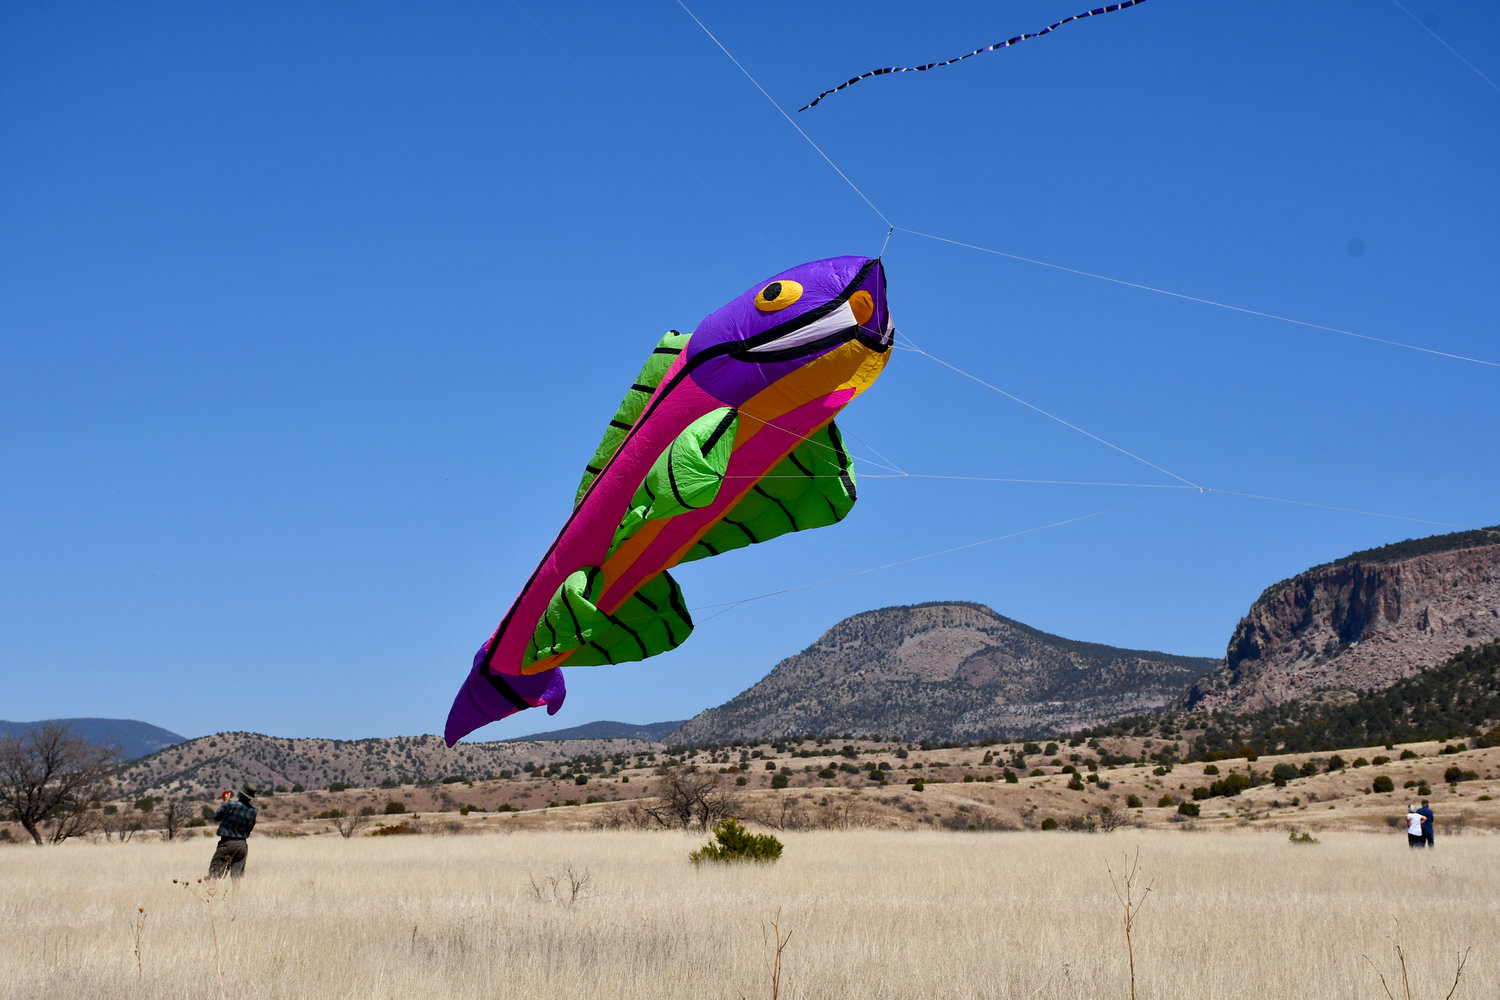 Flying fish? This colorful fish kite was a big hit at last year’s kitefest.